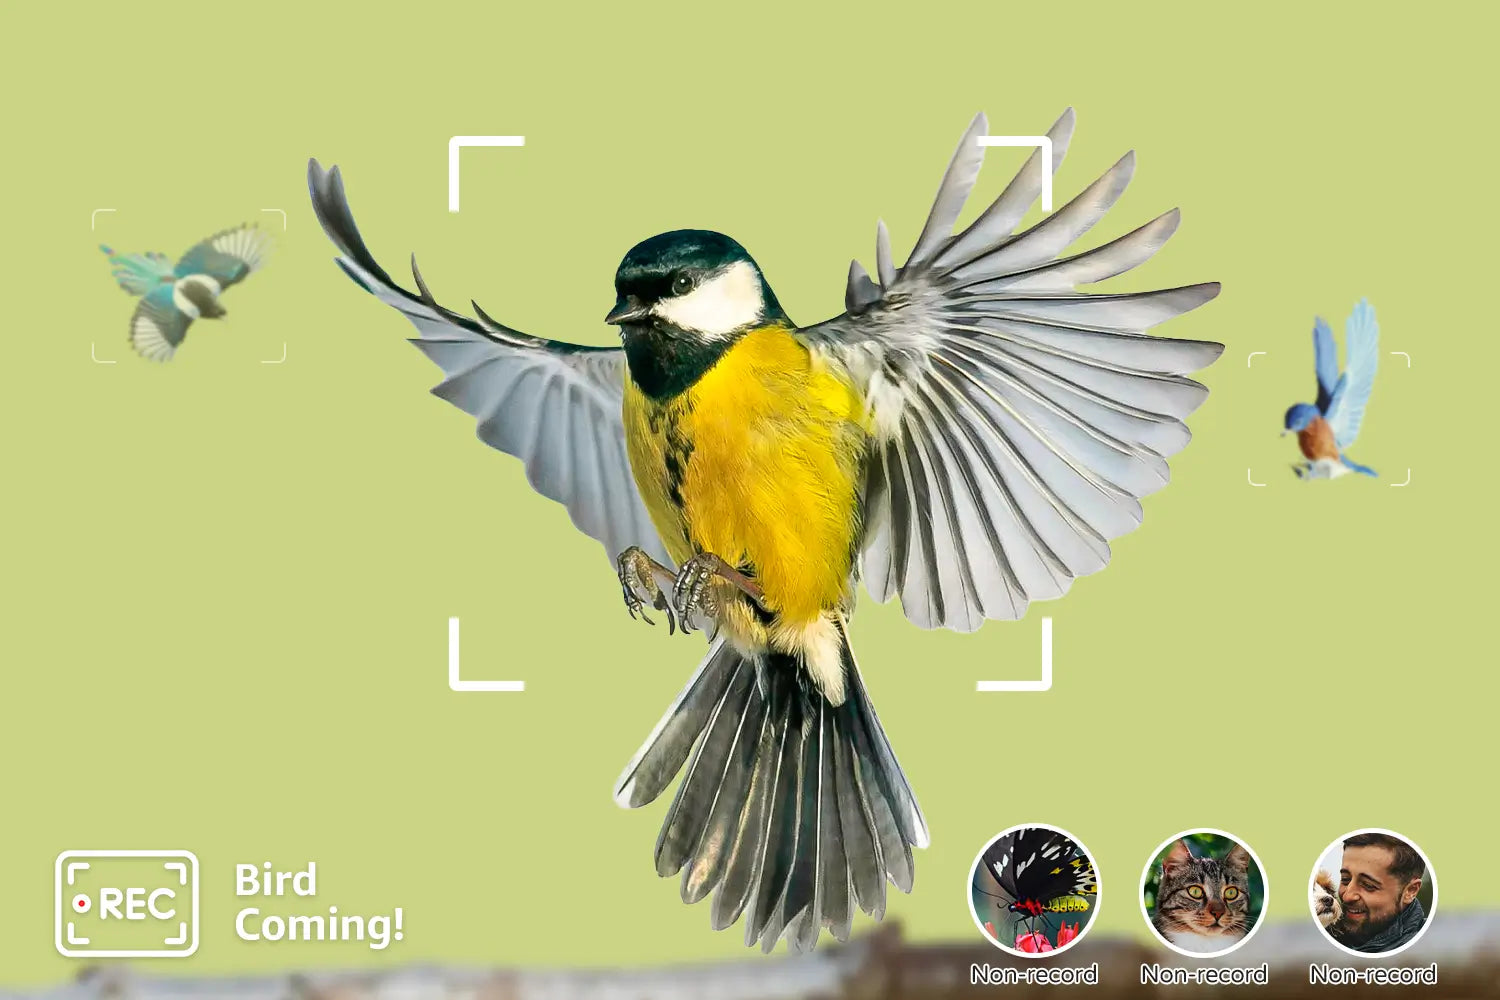 Event recording only when birds arrive, non-bird motion detection won't be recorded.